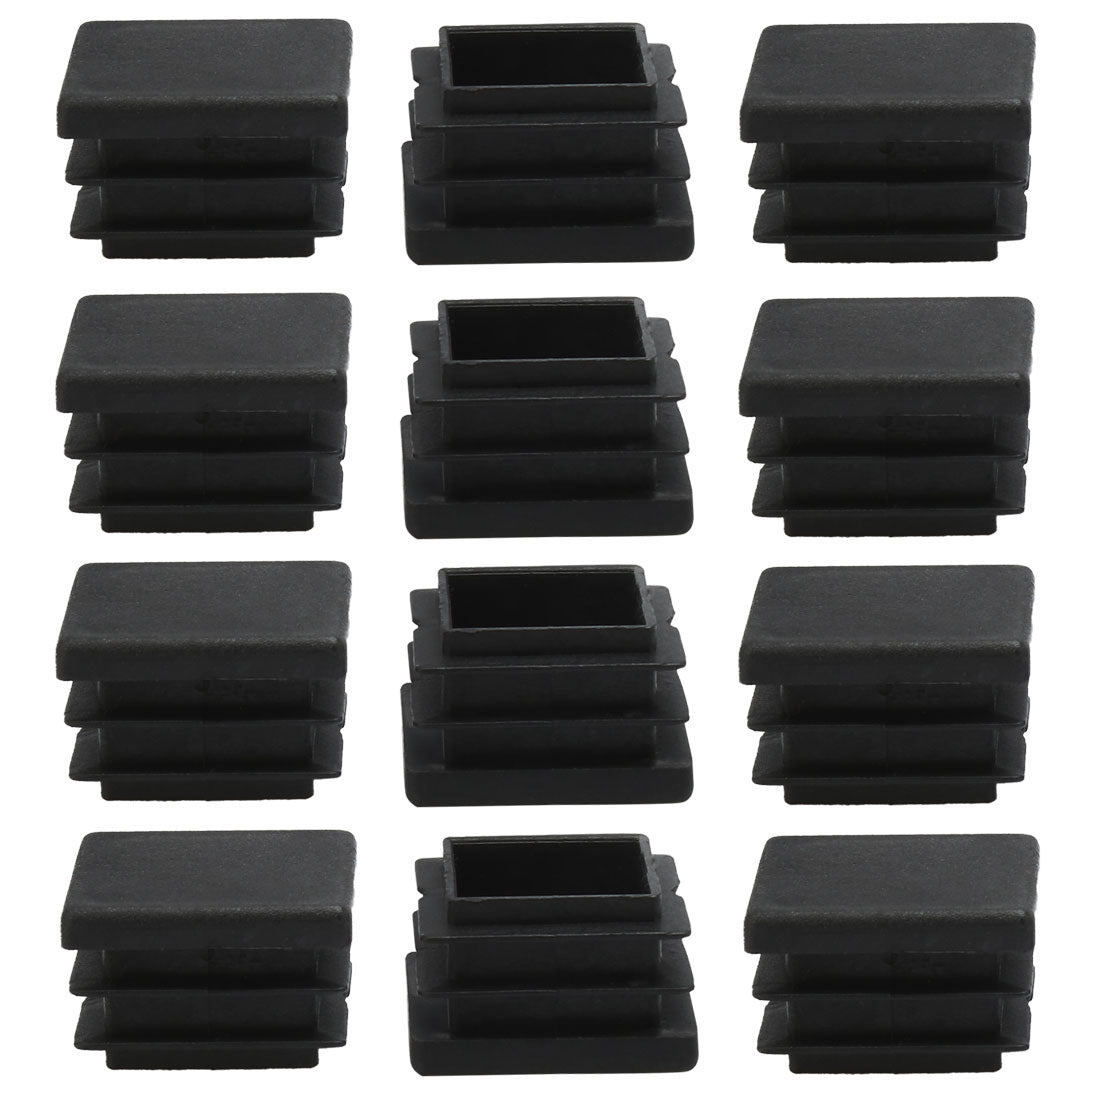 Uxcell Uxcell 12pcs Plastic Square 20 x 20mm Ribbed Tube Inserts Pipe Tubing End Covers Caps Furniture Glide Chair Table Feet Floor Protector